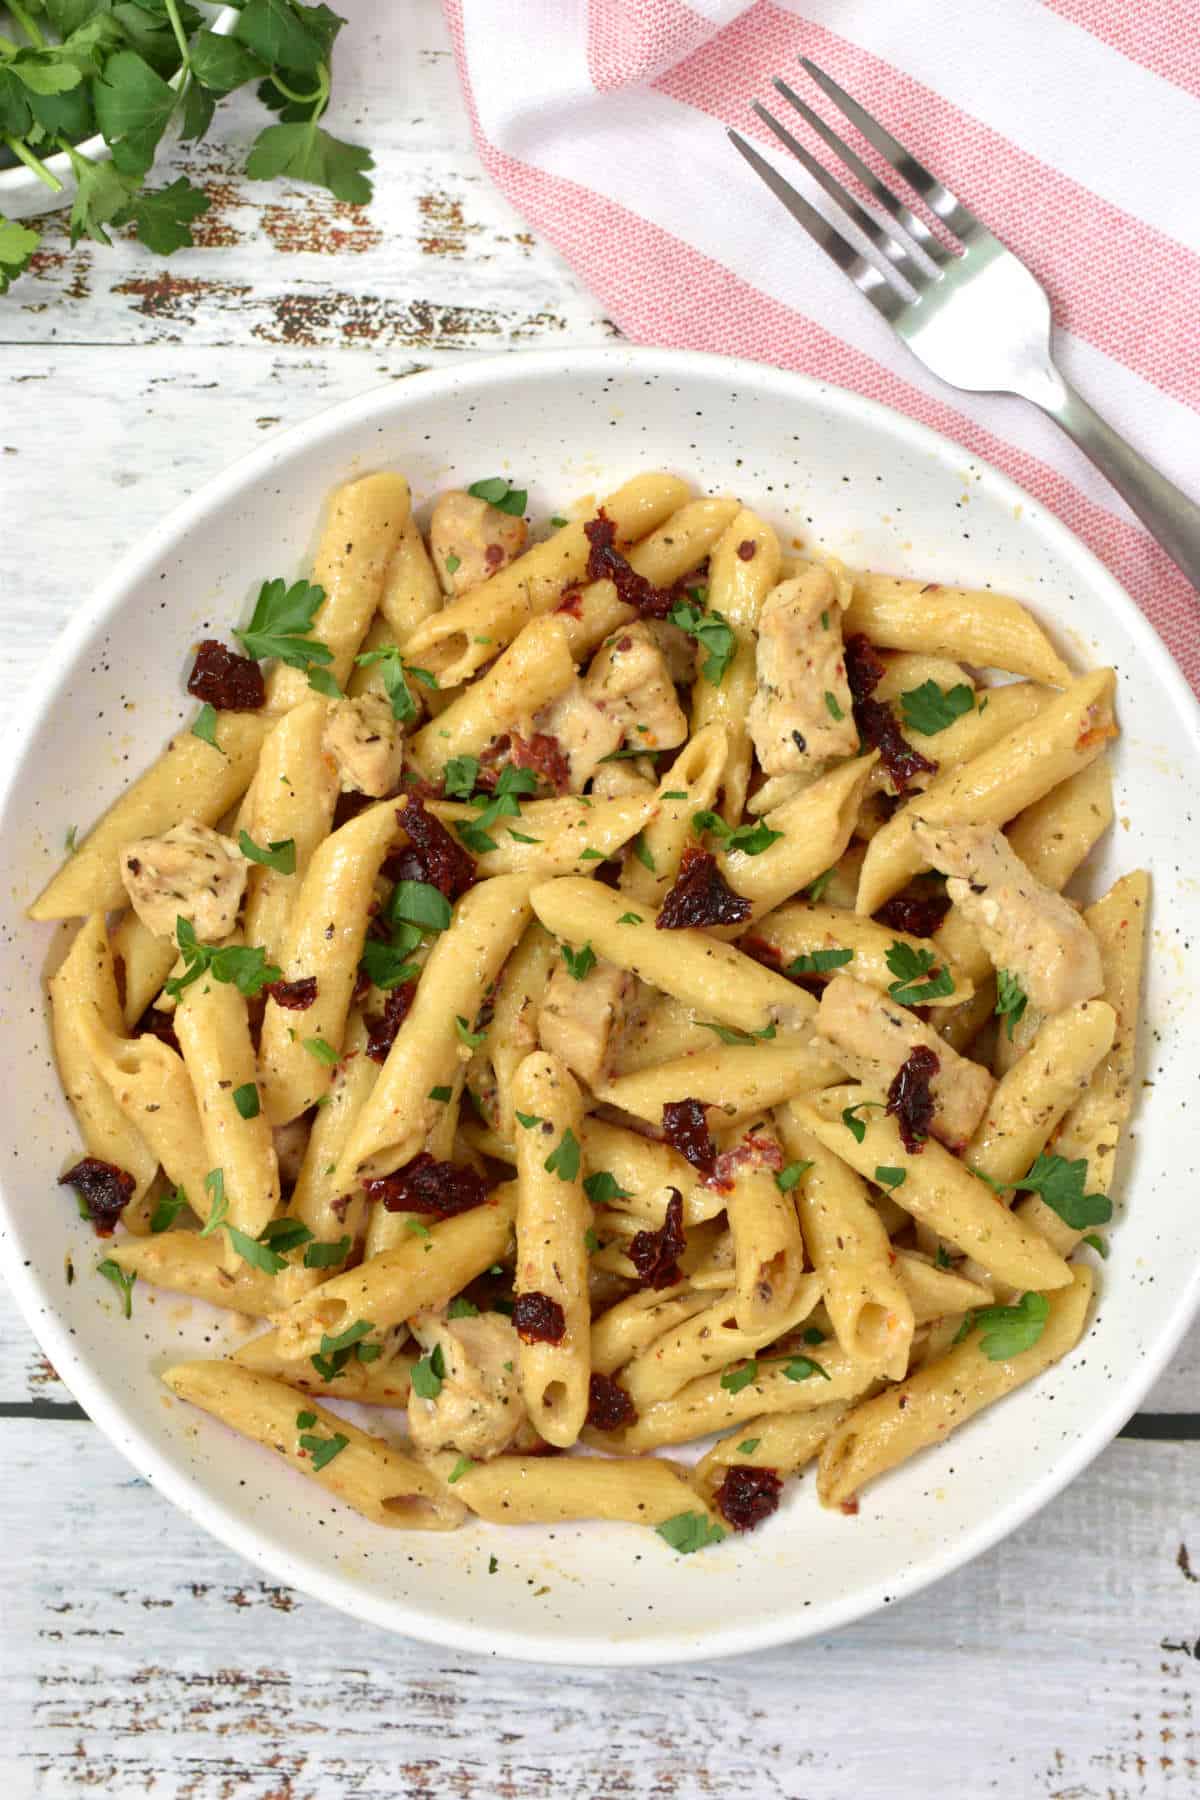 penne pasta with chicken, sundried tomatoes, parsley and parmesan cheese in a plate